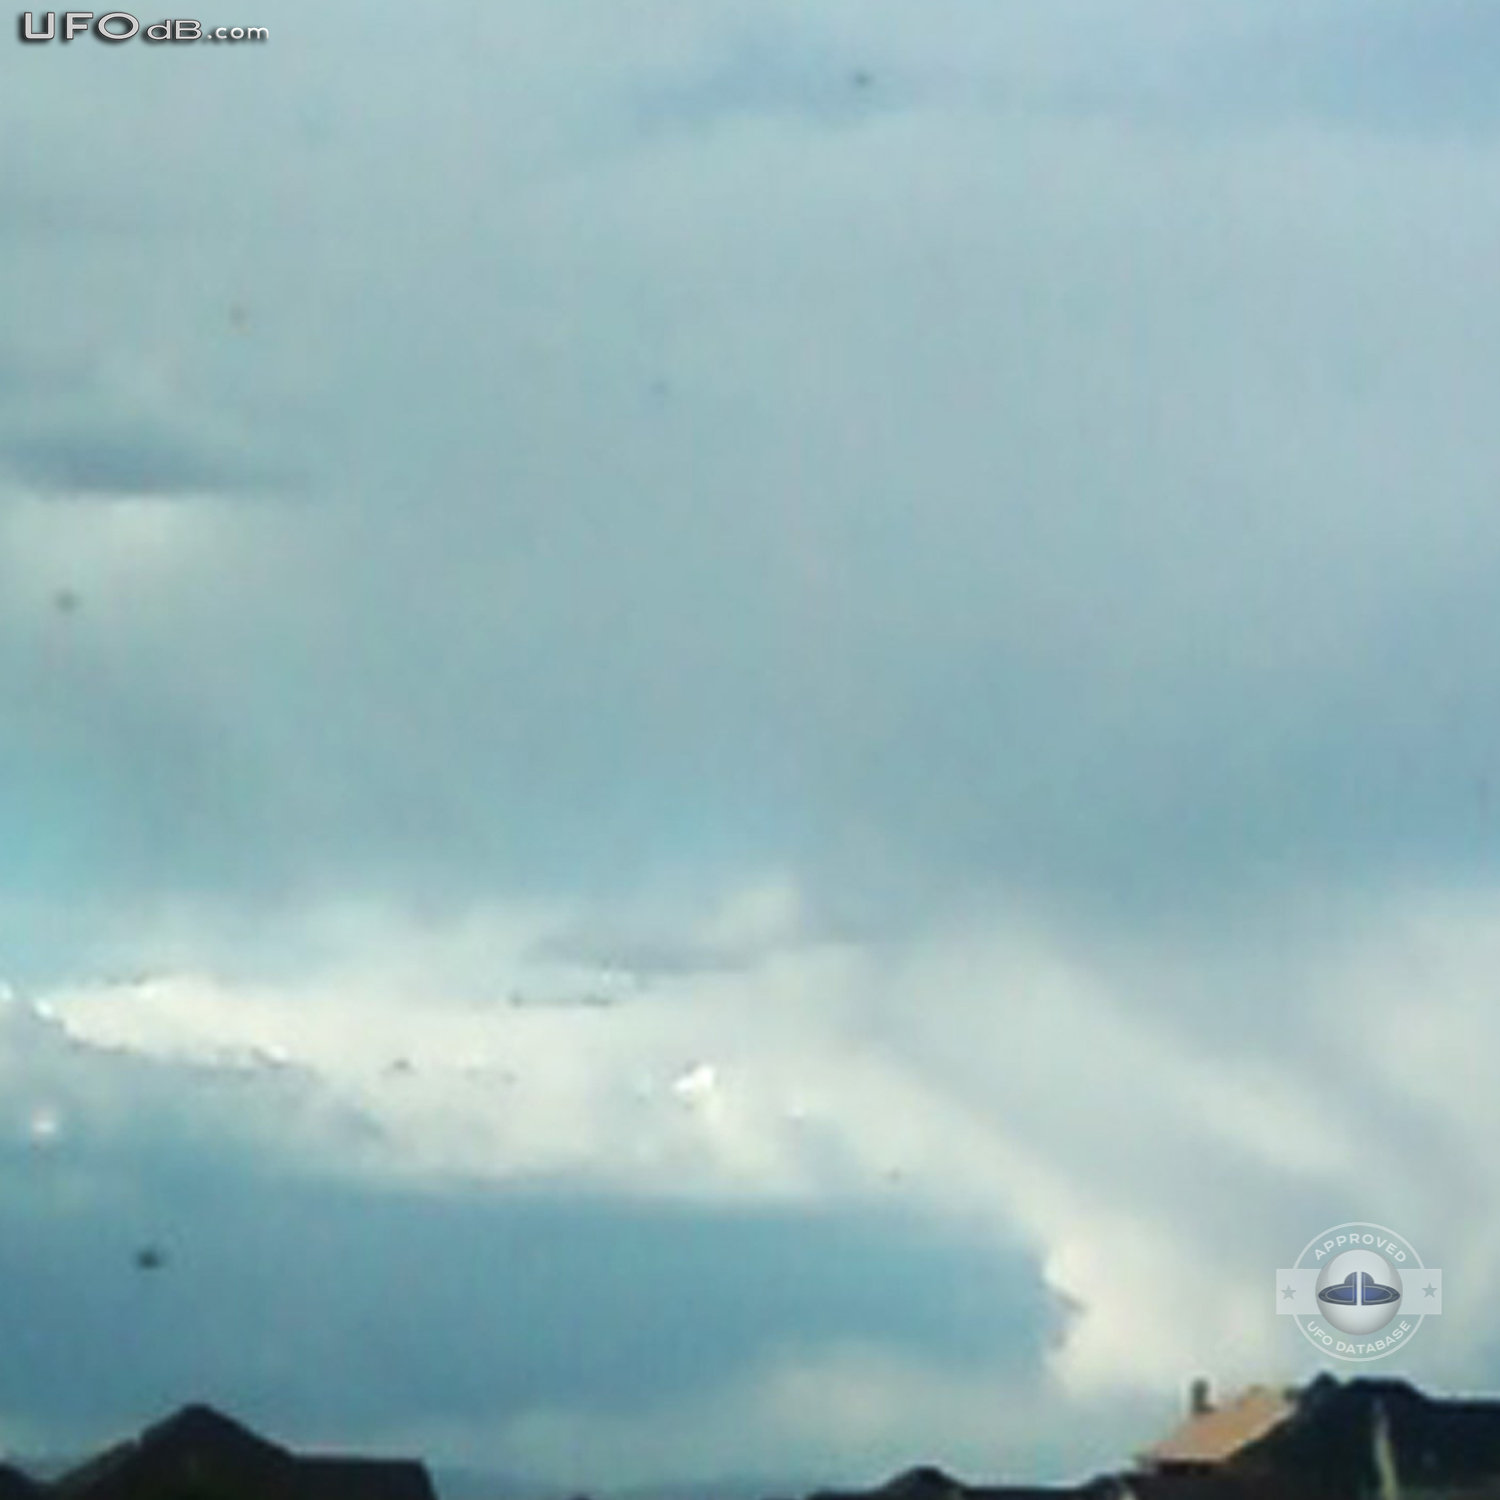 Group of UFOs hiding in the clouds in Cedar City, Utah | May 14 2011 UFO Picture #303-3